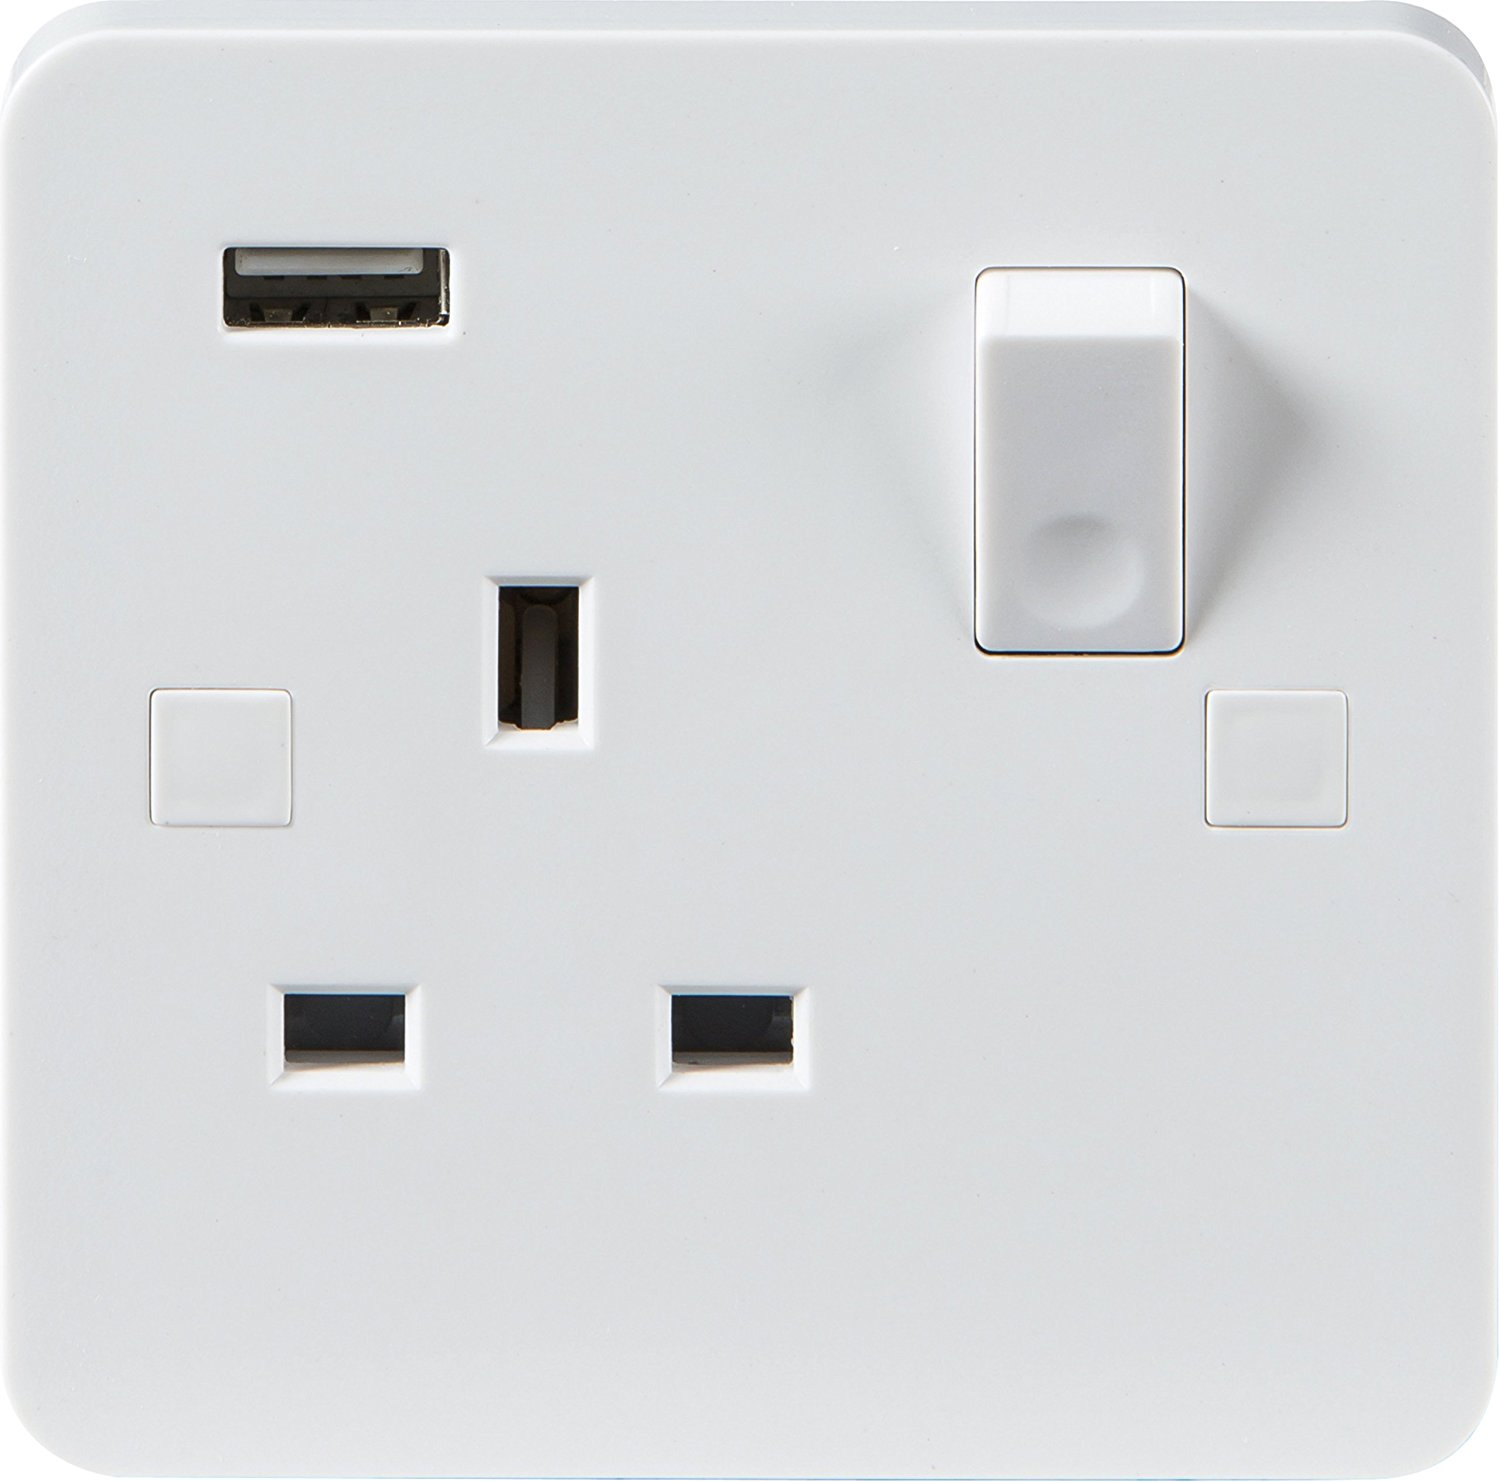 Knightsbridge PU9901 9 mm 13 A 1-Gang DP Pure Switched Socket with 5 ...